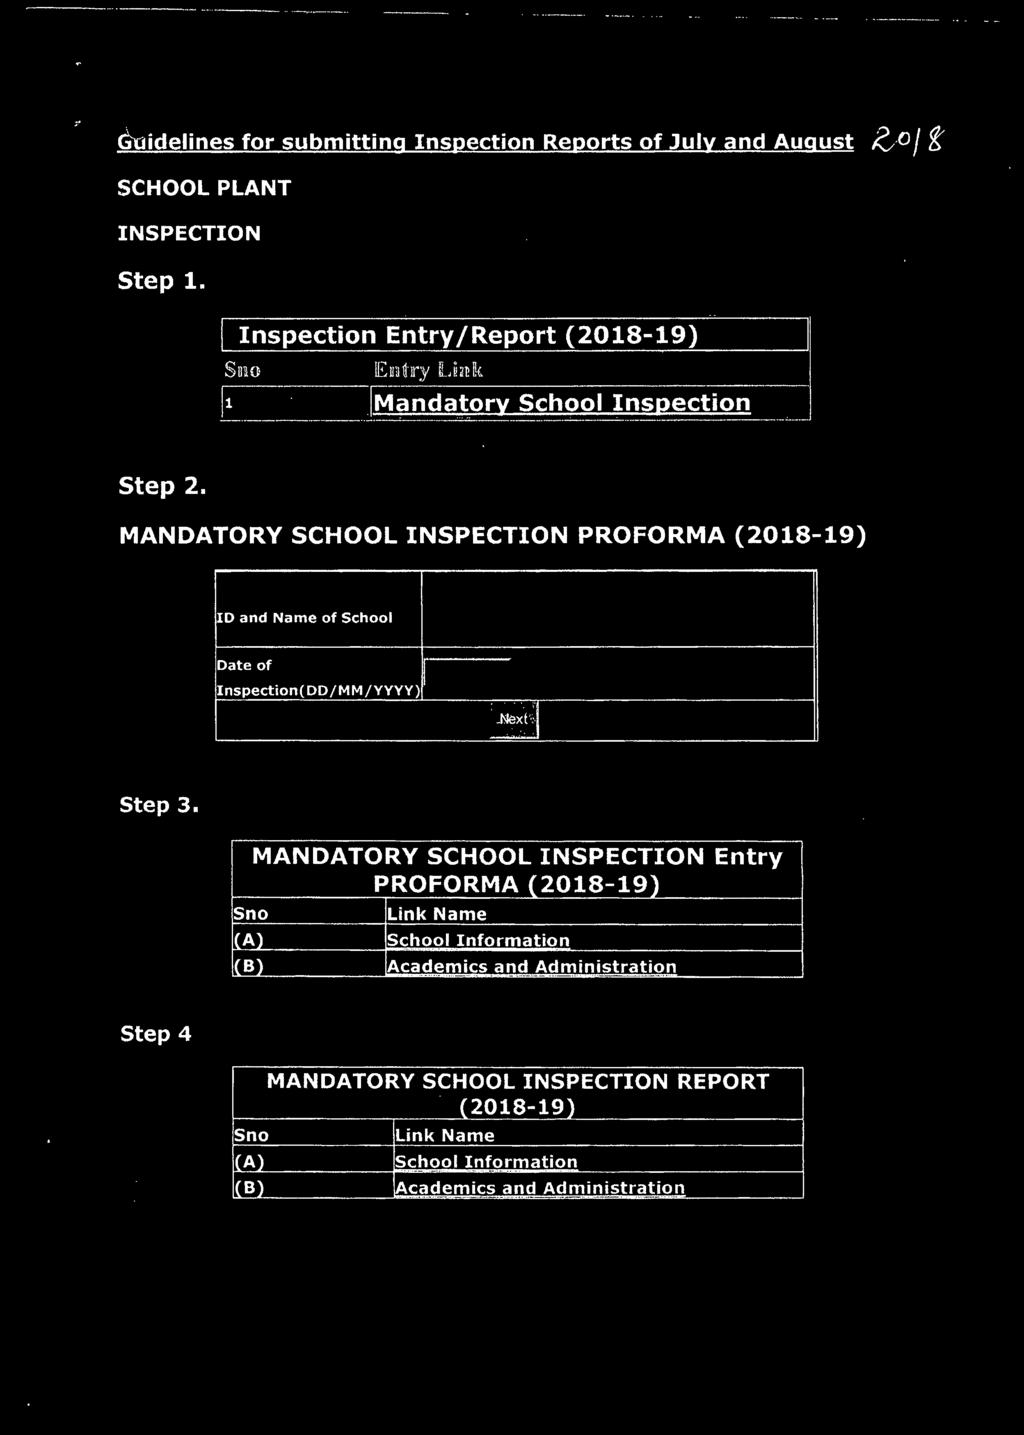 MANDATORY SCHOOL INSPECTION PROFORMA (2018-19) 10 and Name of School Date of Inspection(DDjMMjYYYY) :-,~.'1 ~N x~r' -.~ Step 3.